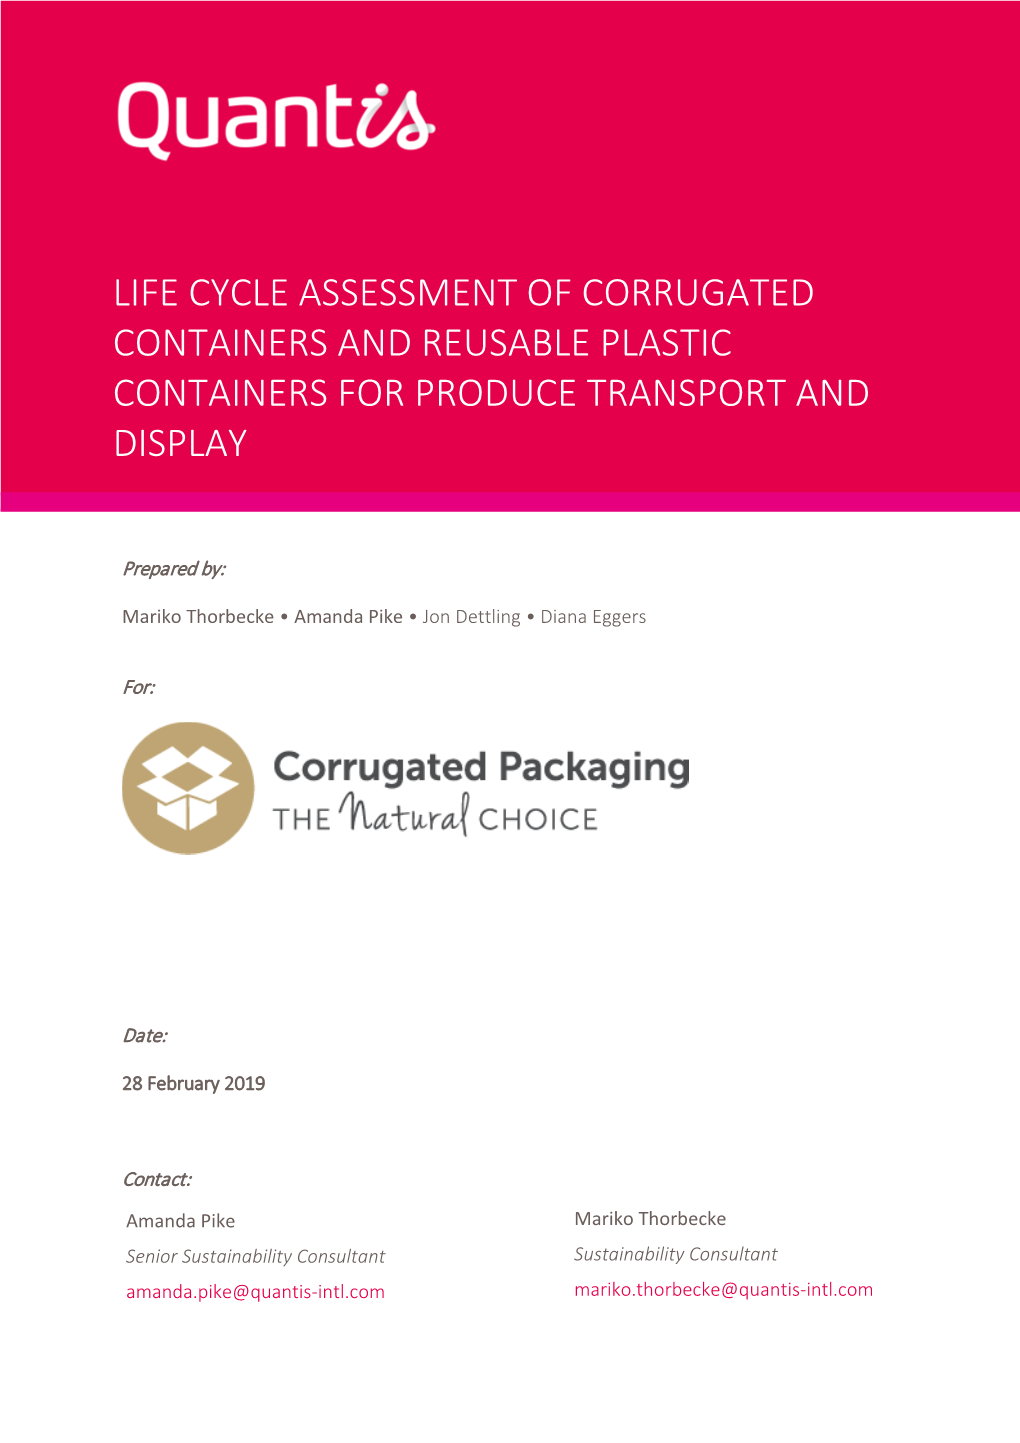 Life Cycle Assessment of Corrugated Containers and Reusable Plastic